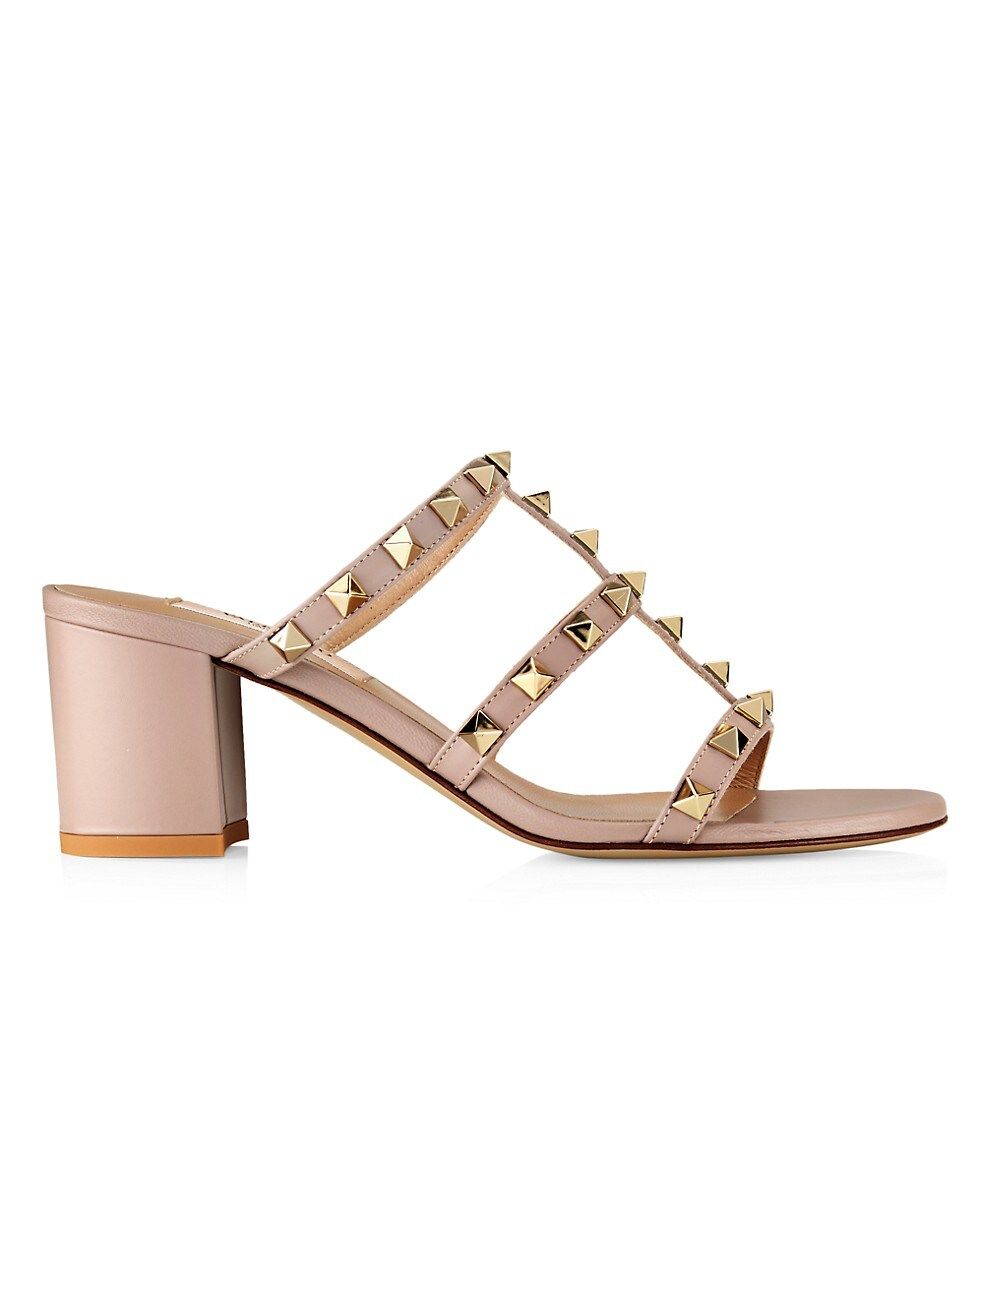 Rockstud Leather Strappy Mule Sandals | Saks Fifth Avenue